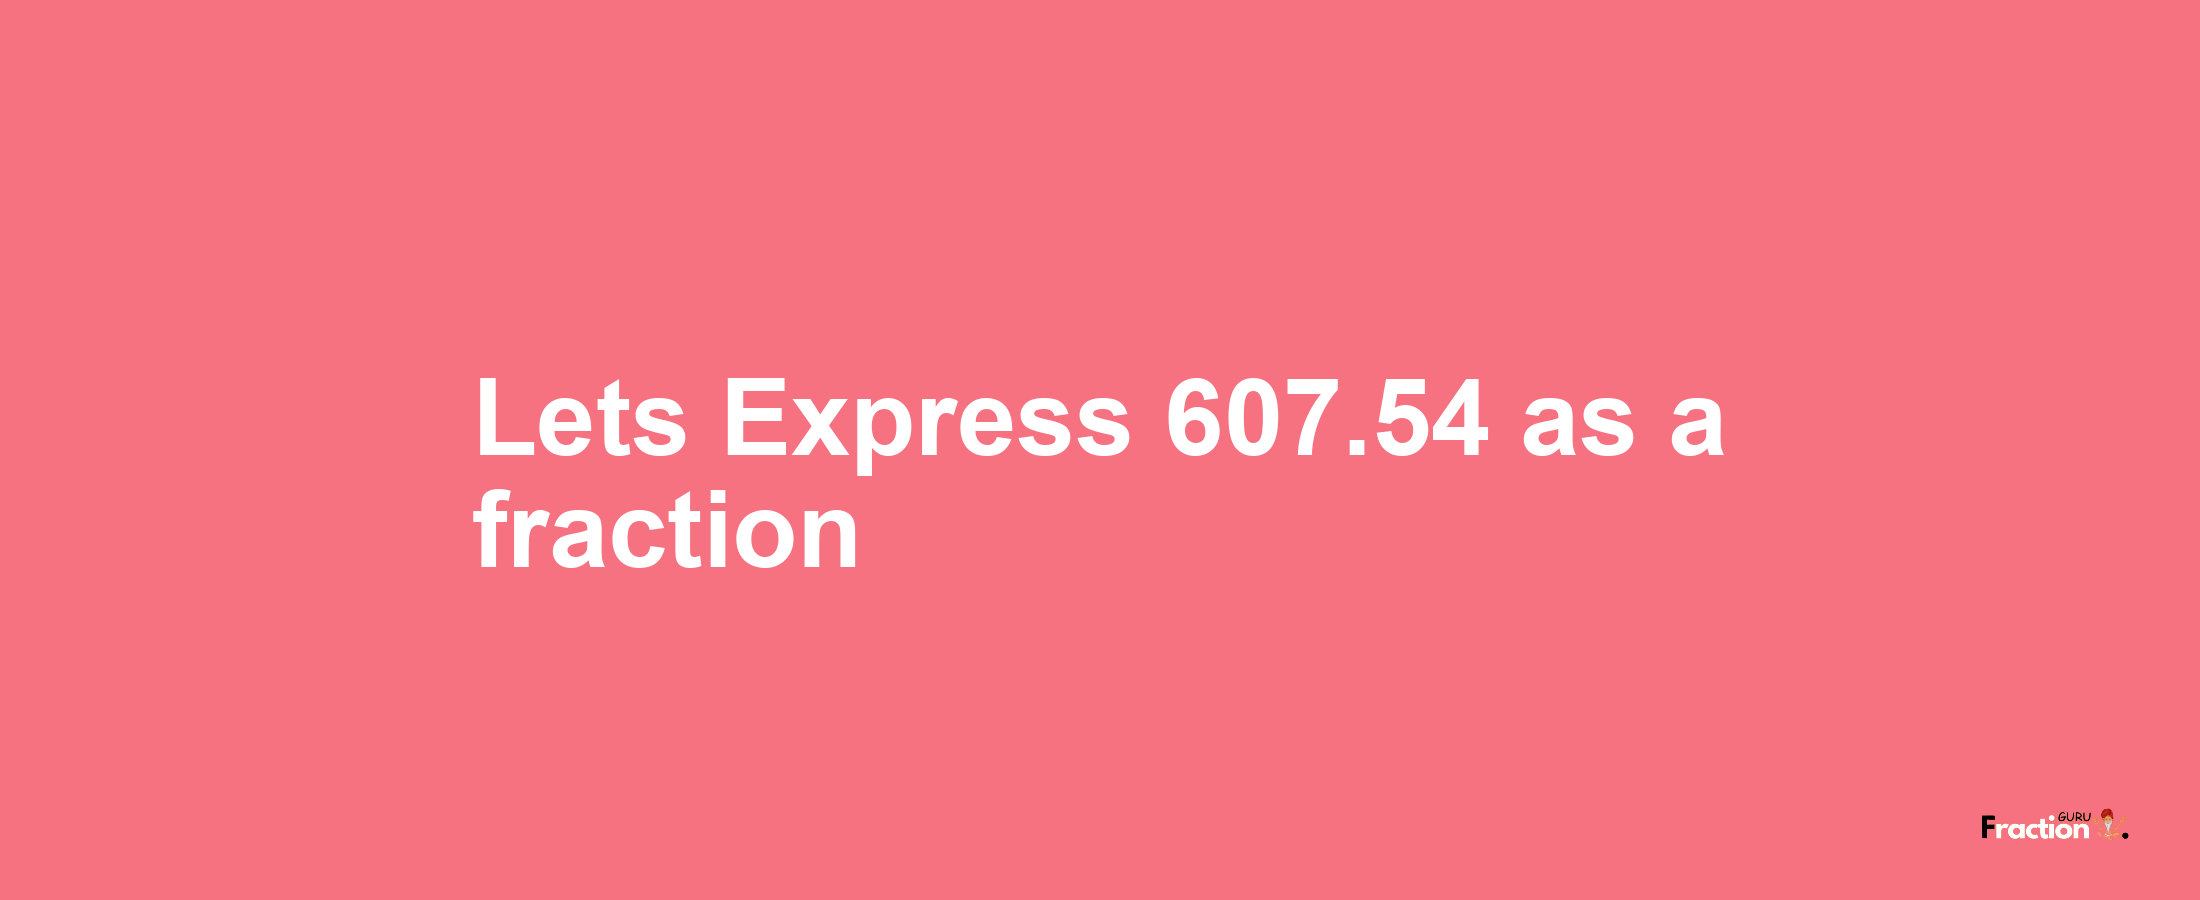 Lets Express 607.54 as afraction